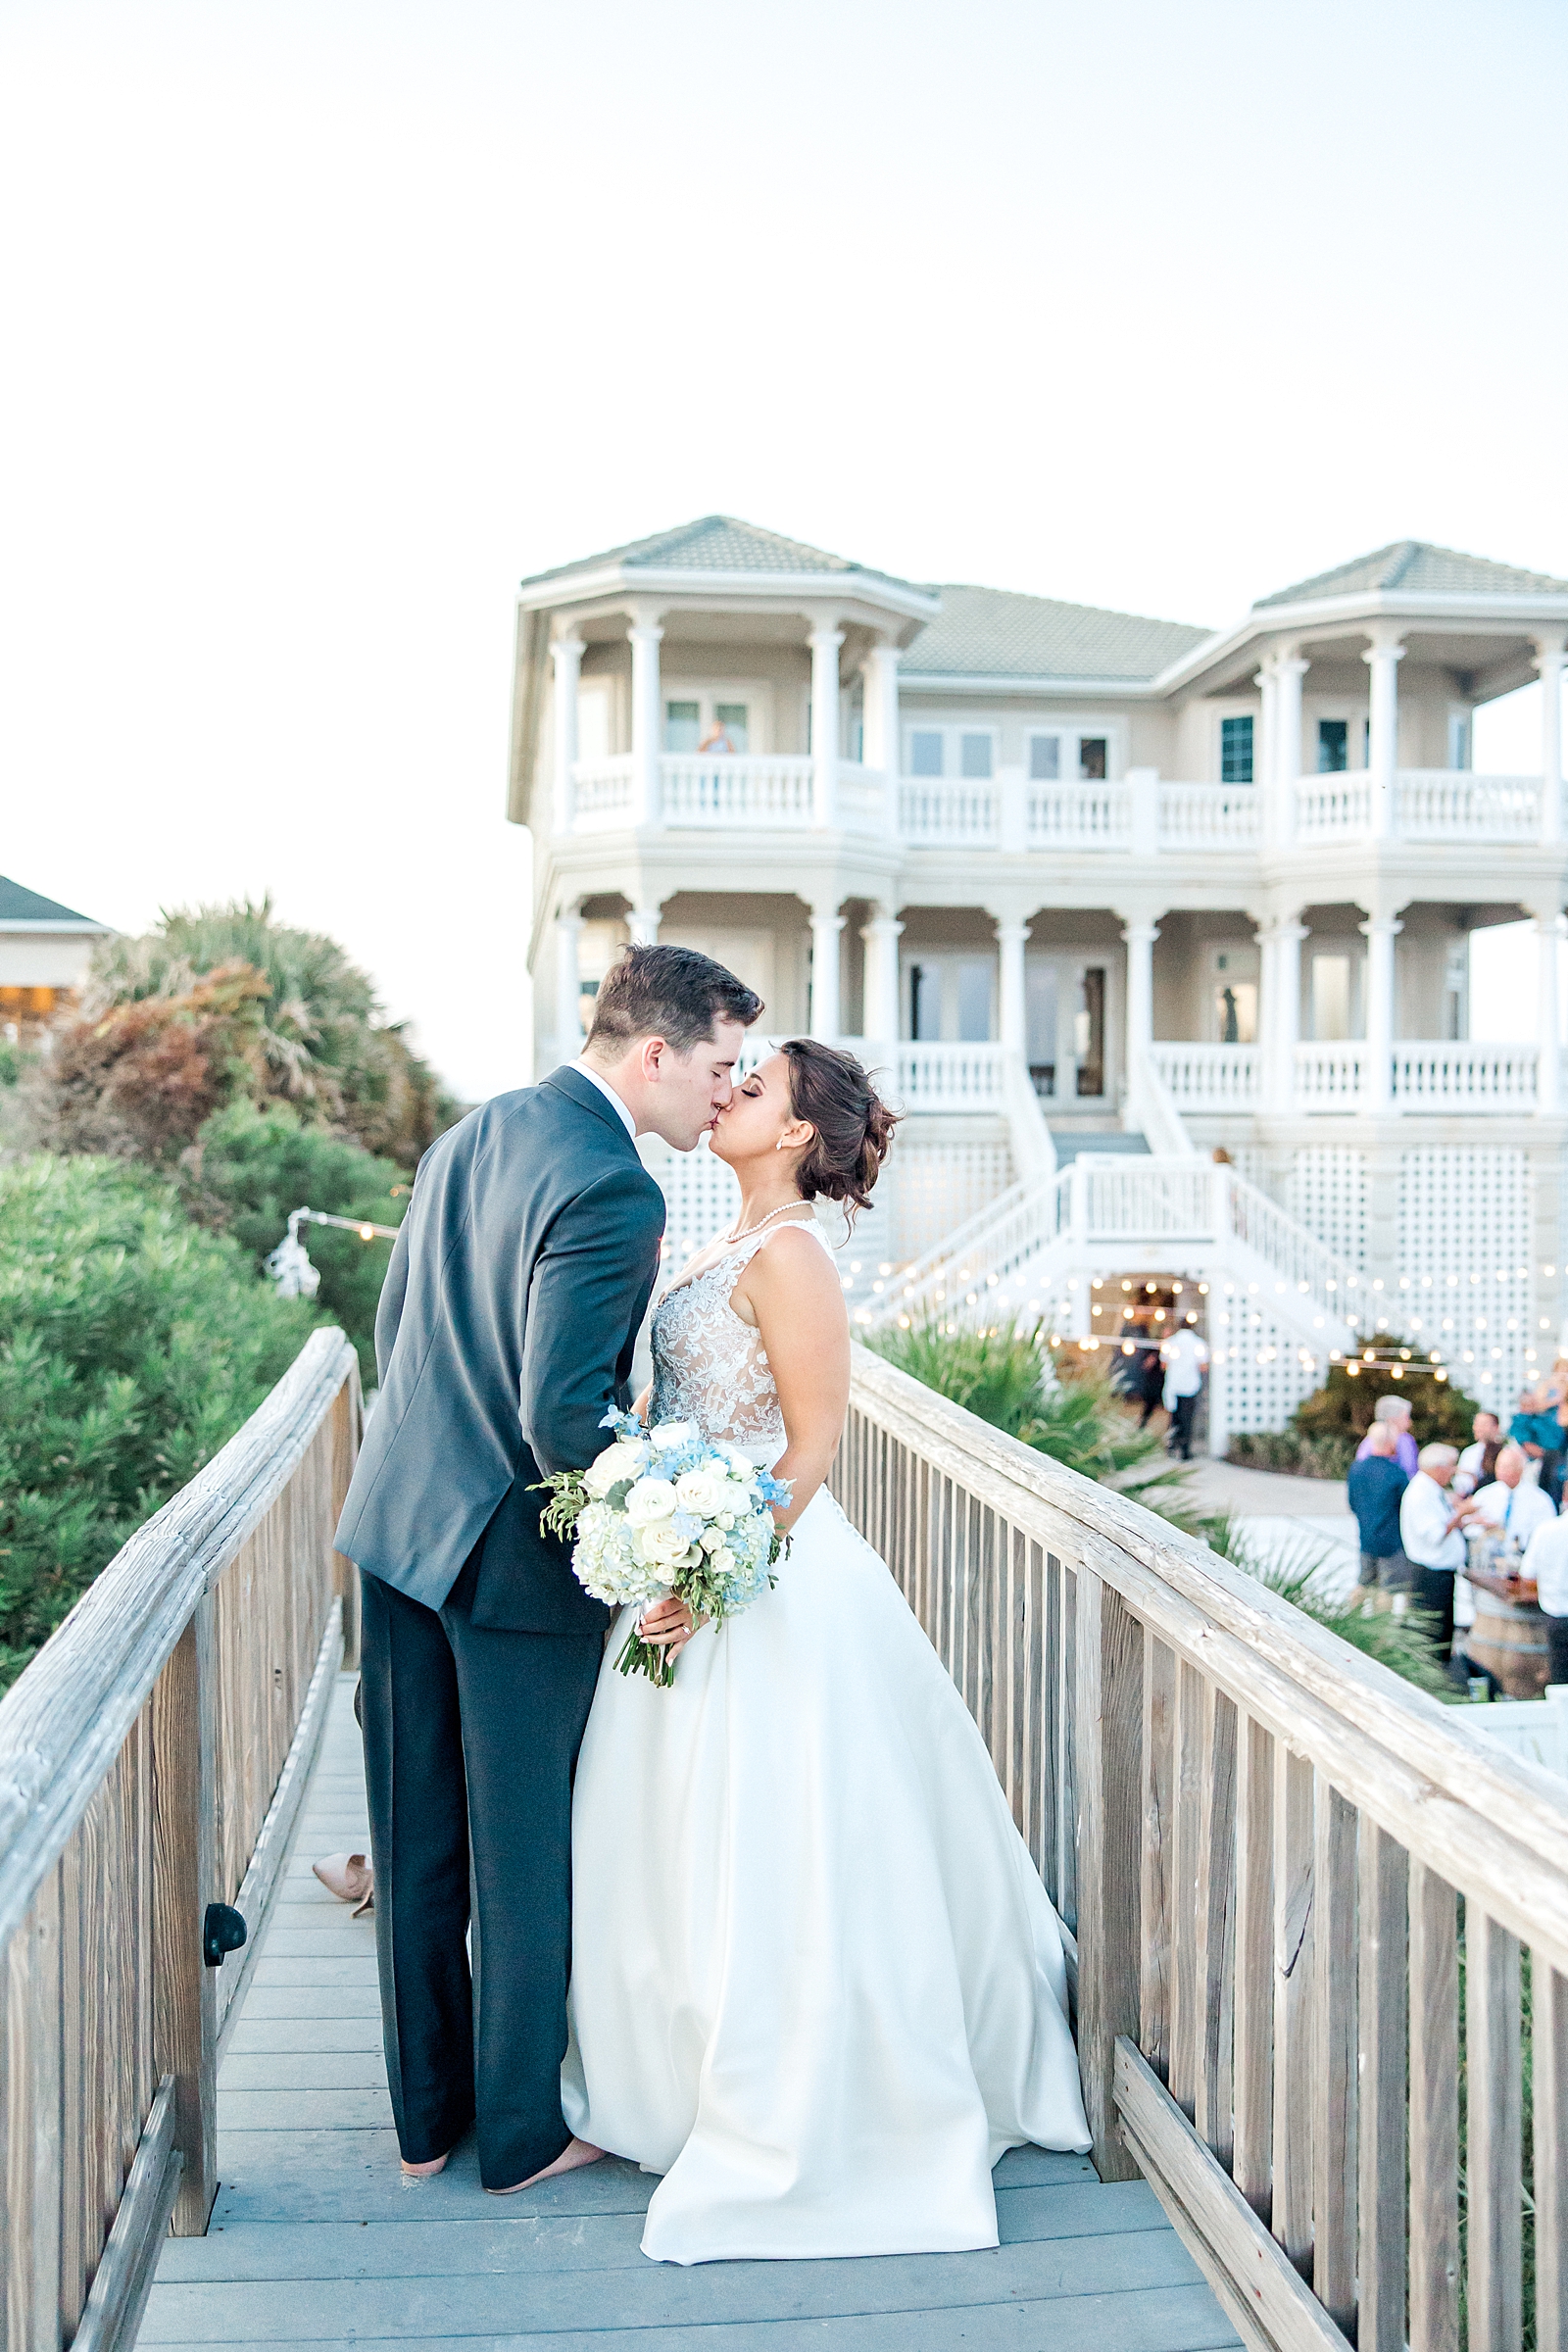 newlyweds kiss with the beach house in the background